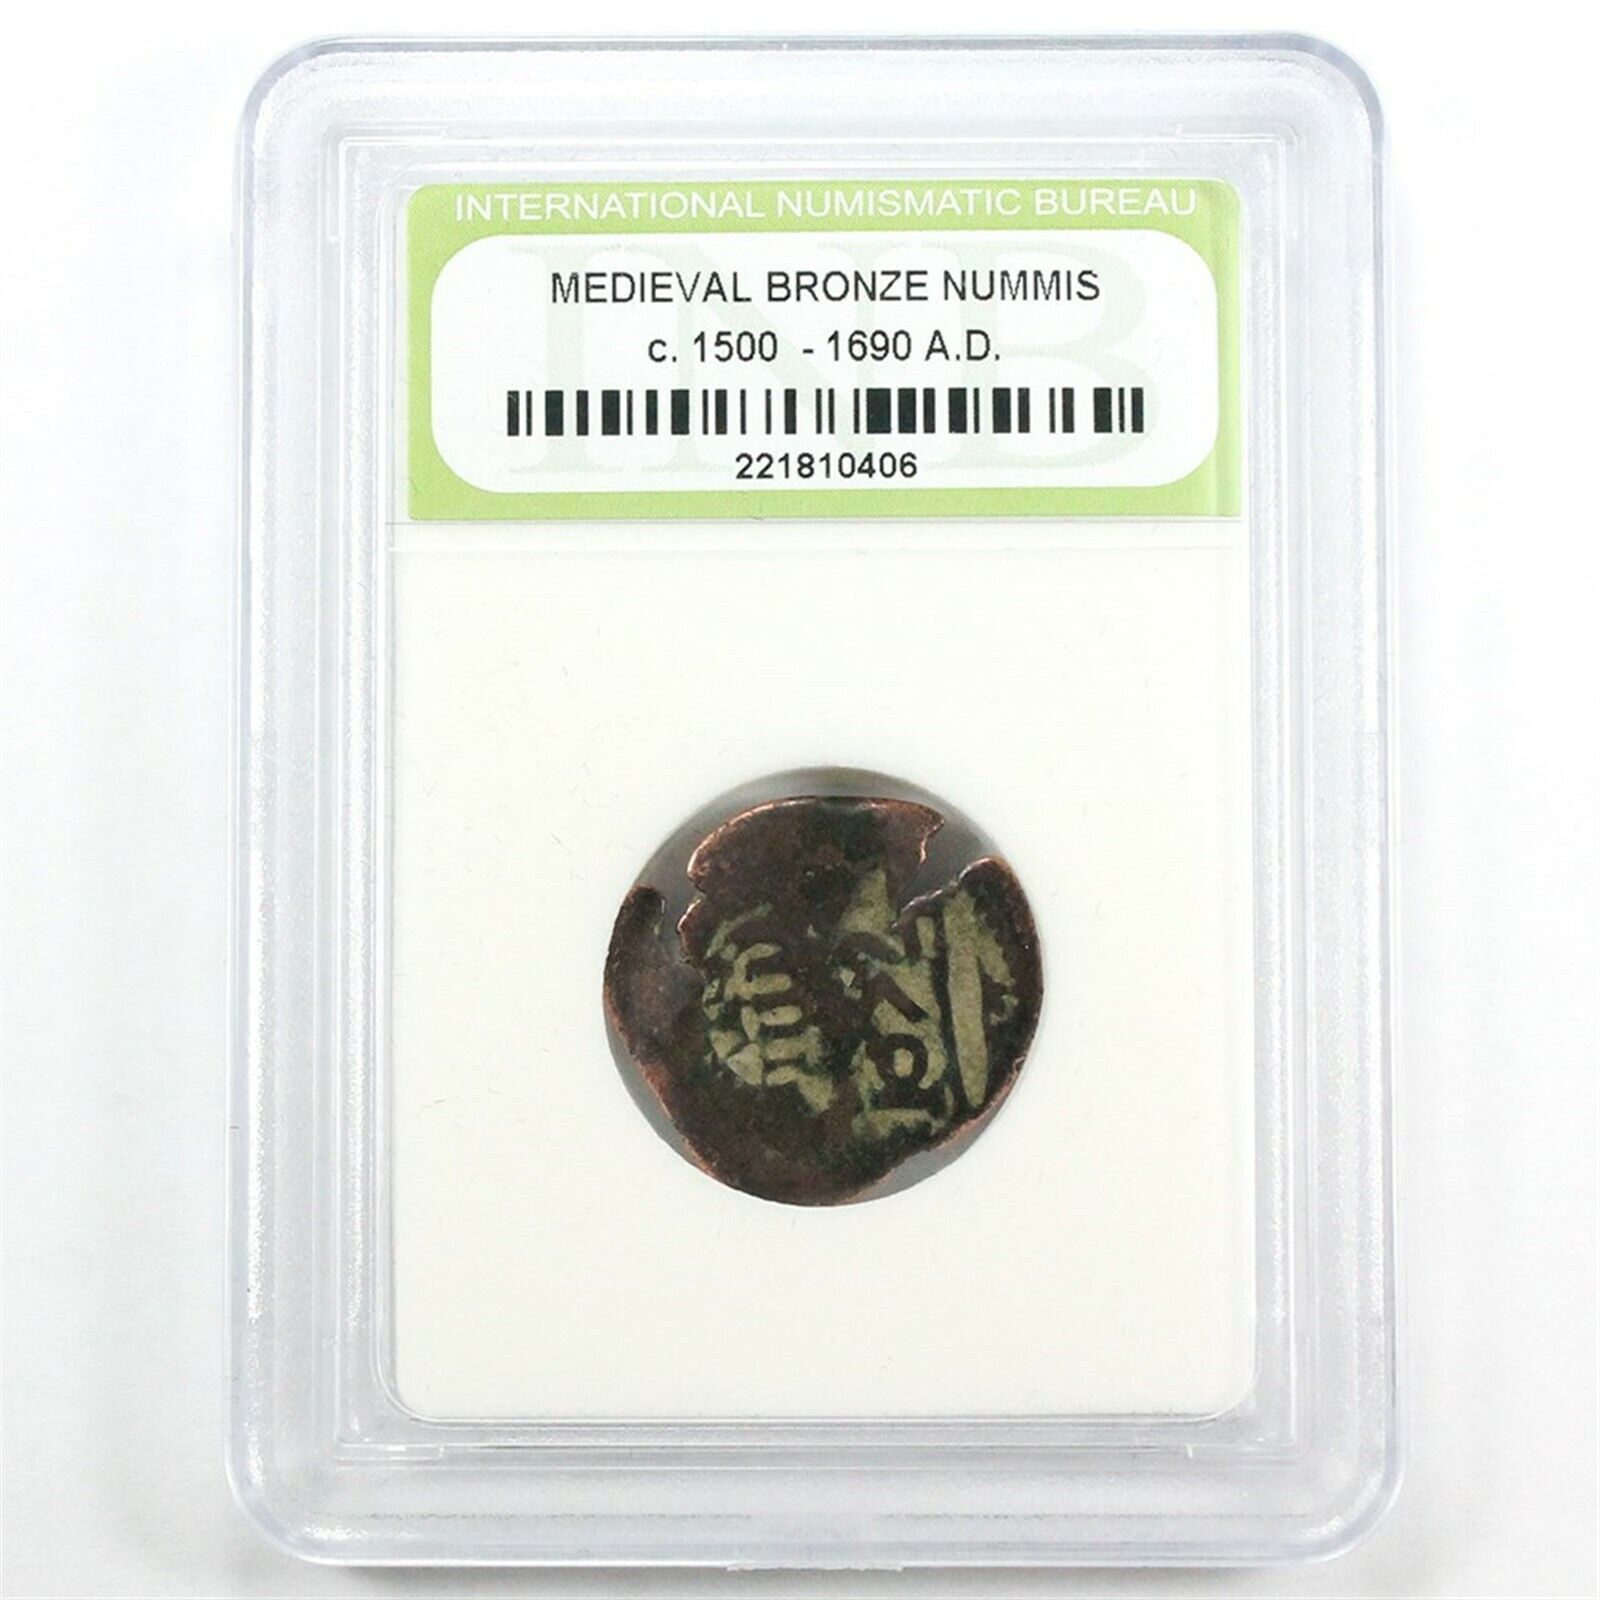 Medieval Bronze Nummis Coin with Clear Date c. 1500 - 1690's A.D. st6732 Без бренда